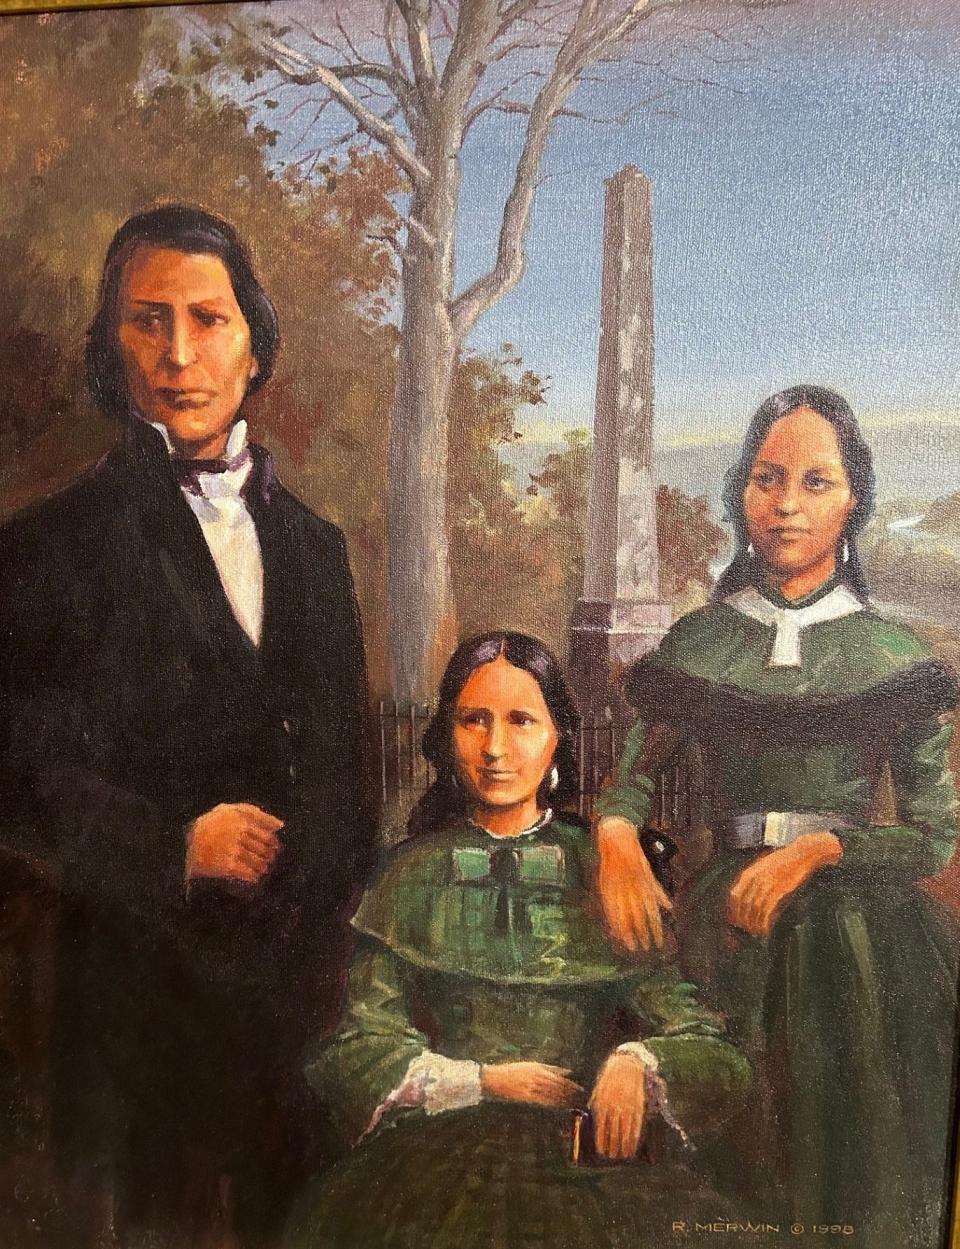 The portrait of the Loft children, painted by R. Merwin and based on an earlier photograph.